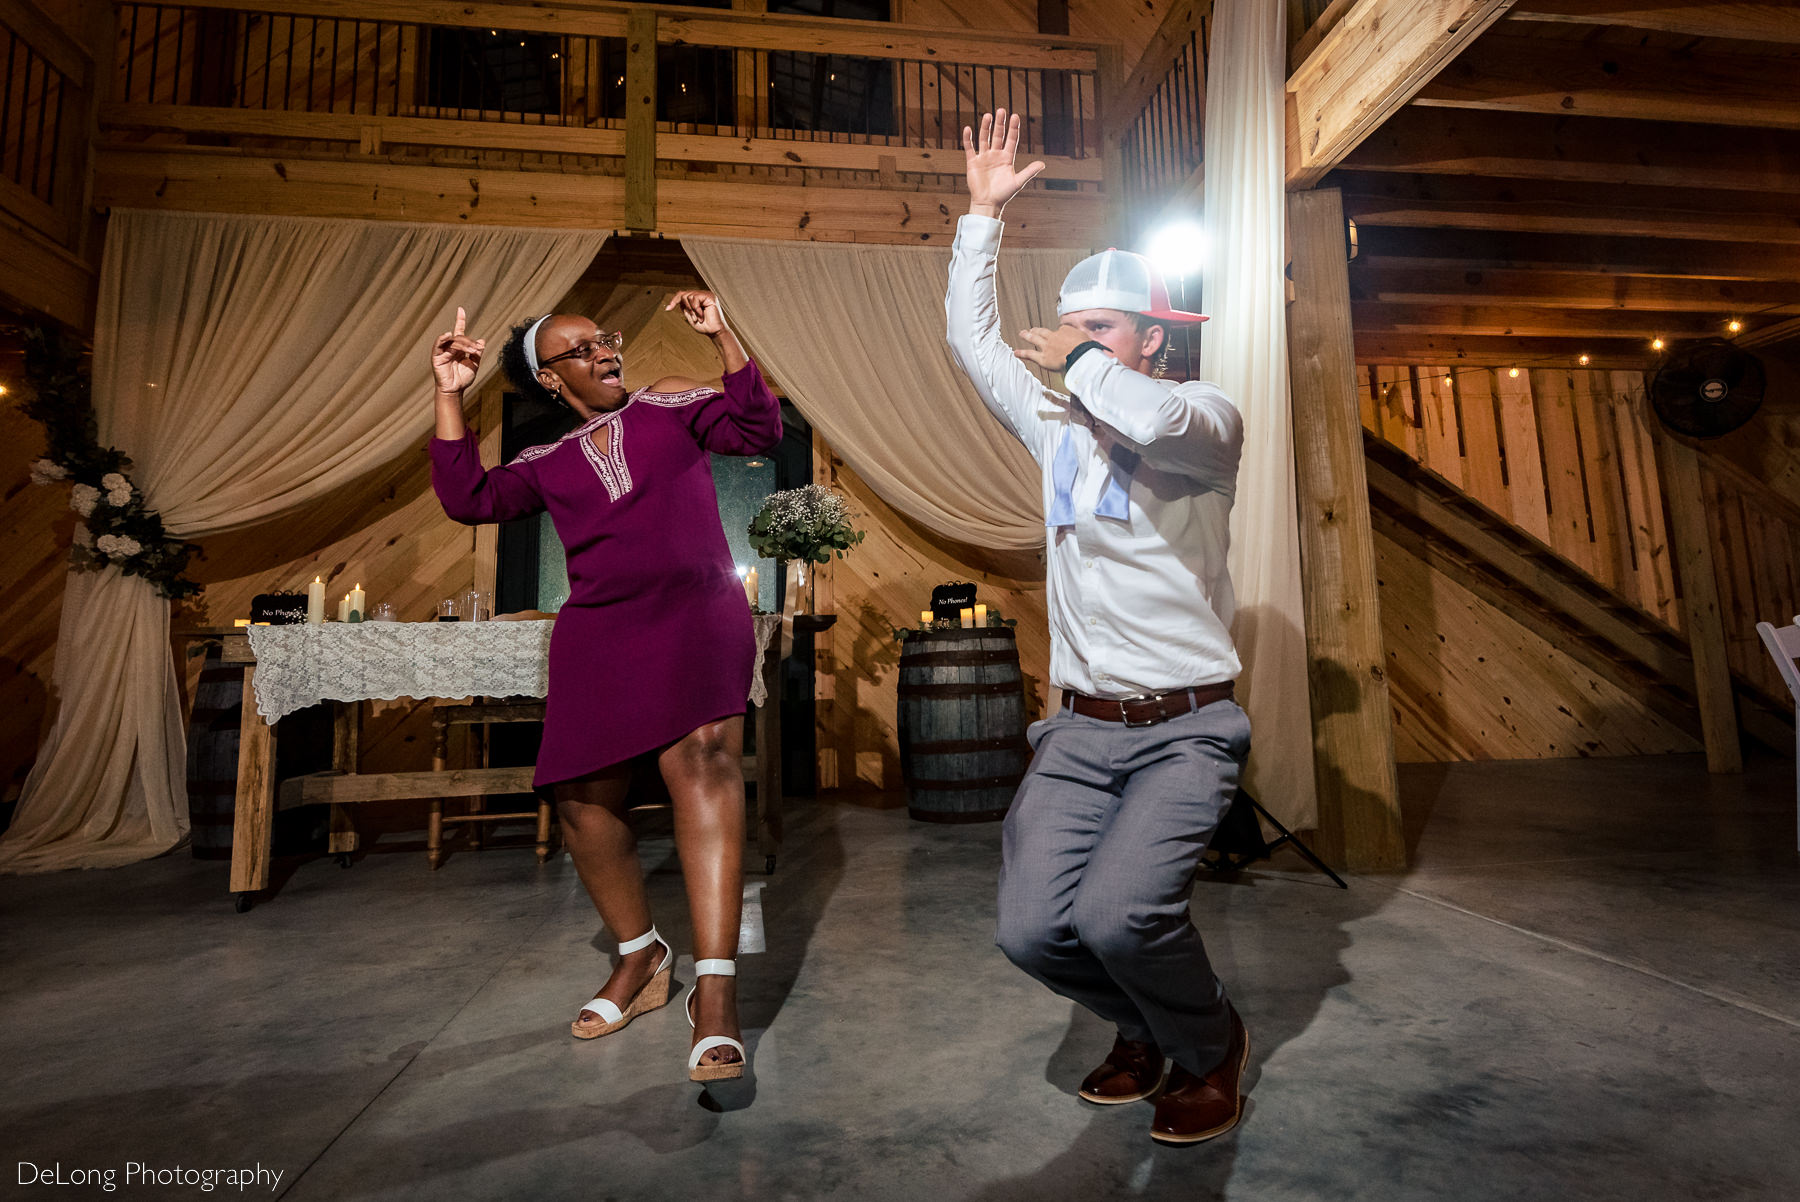 Funny dancing image during wedding reception at Lady Bird Farms by Charlotte Wedding Photographers DeLong Photography